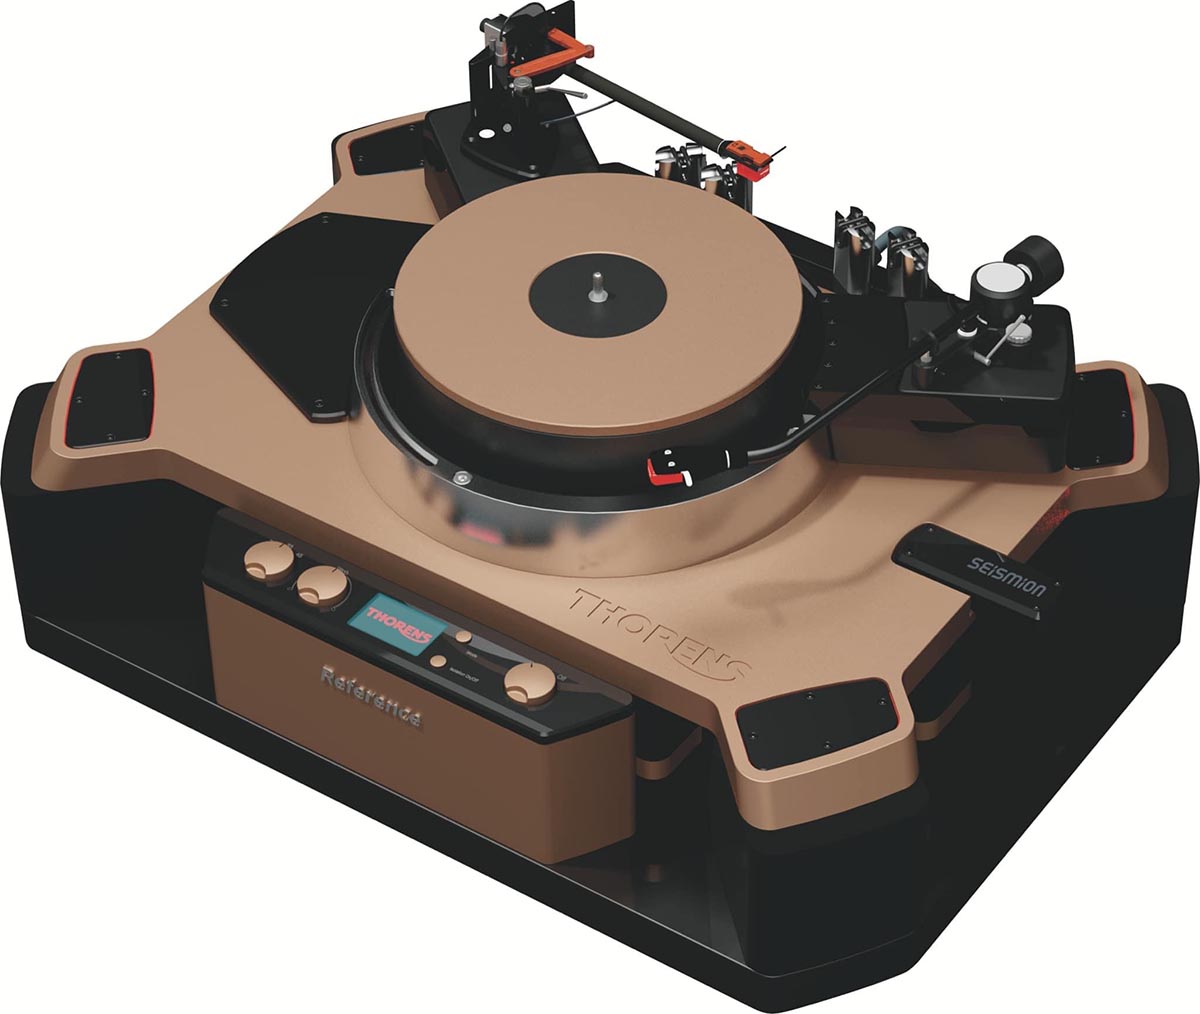 nghenhin_vietnam_chi_tiet_cong_nghe_ky_thuat_mam_than_thorens_new_reference_2023_turntable_h5.jpg (105 KB)